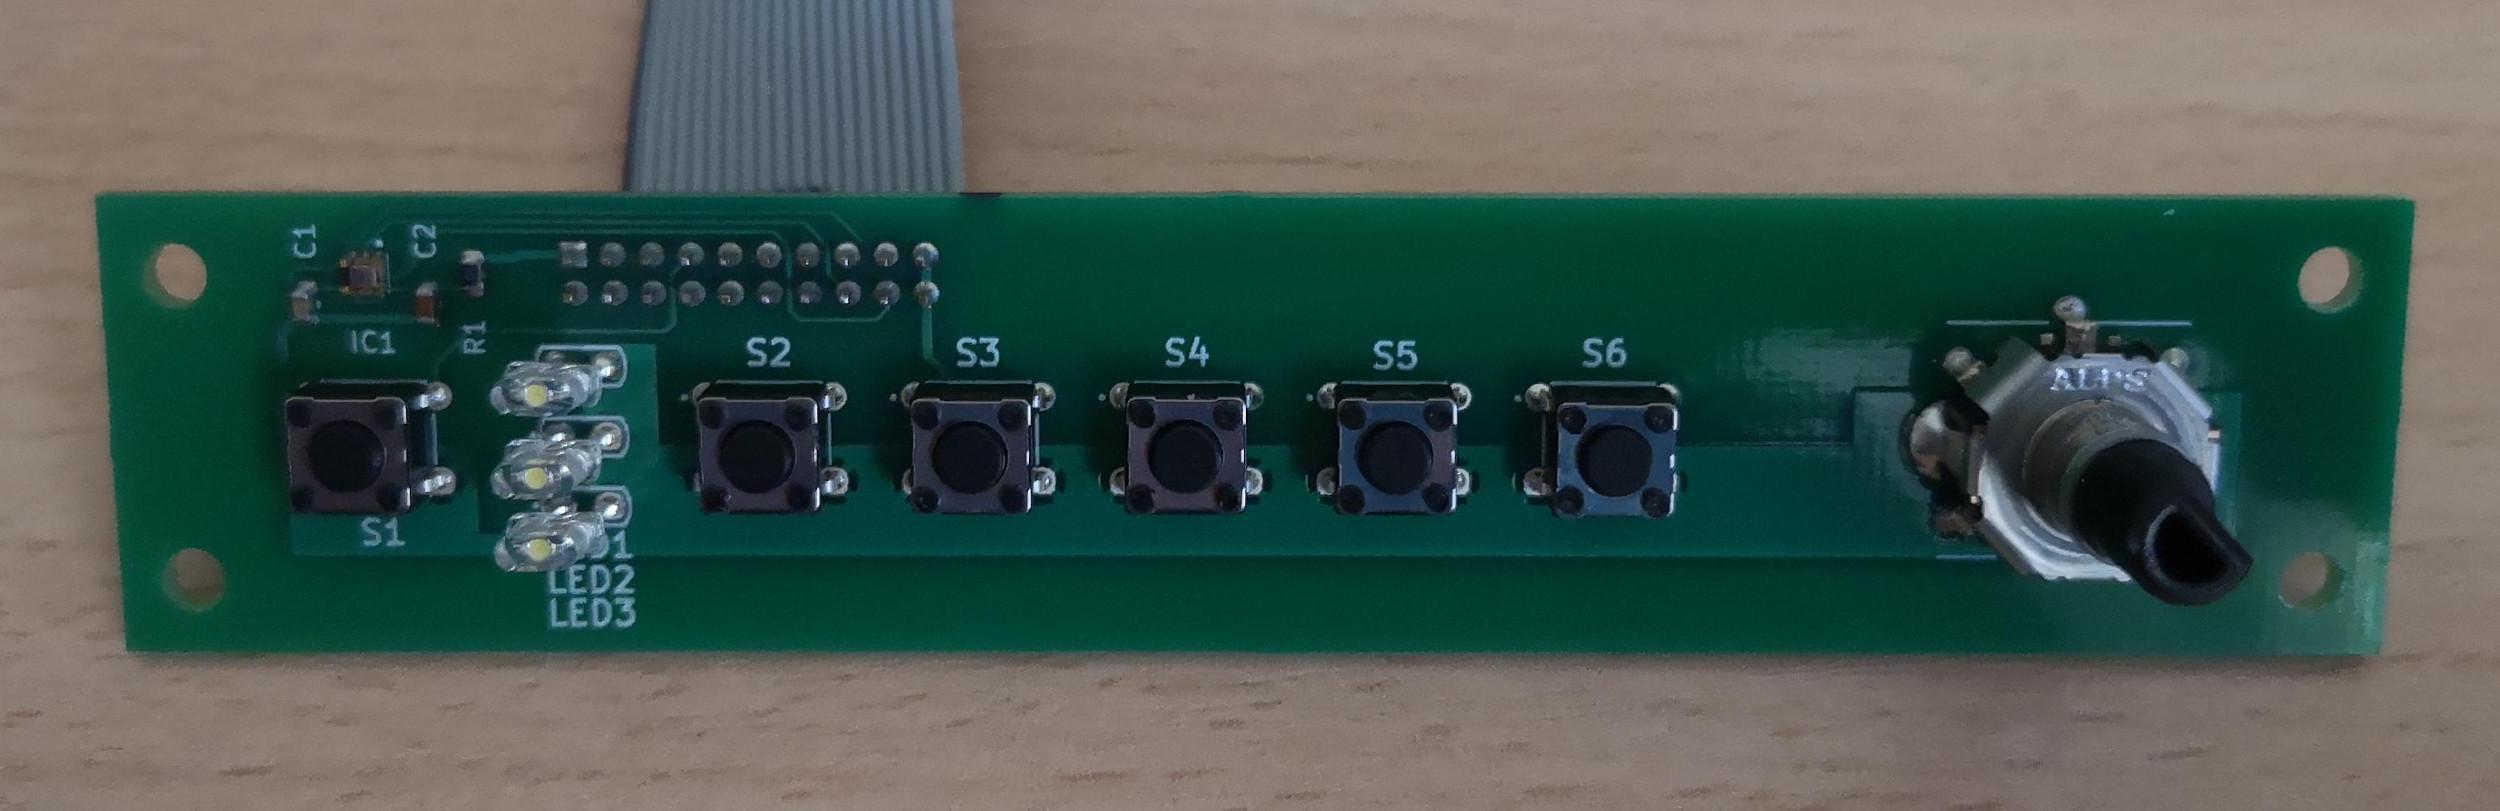 VEML6030 in a PCB of a product by SDCSystems